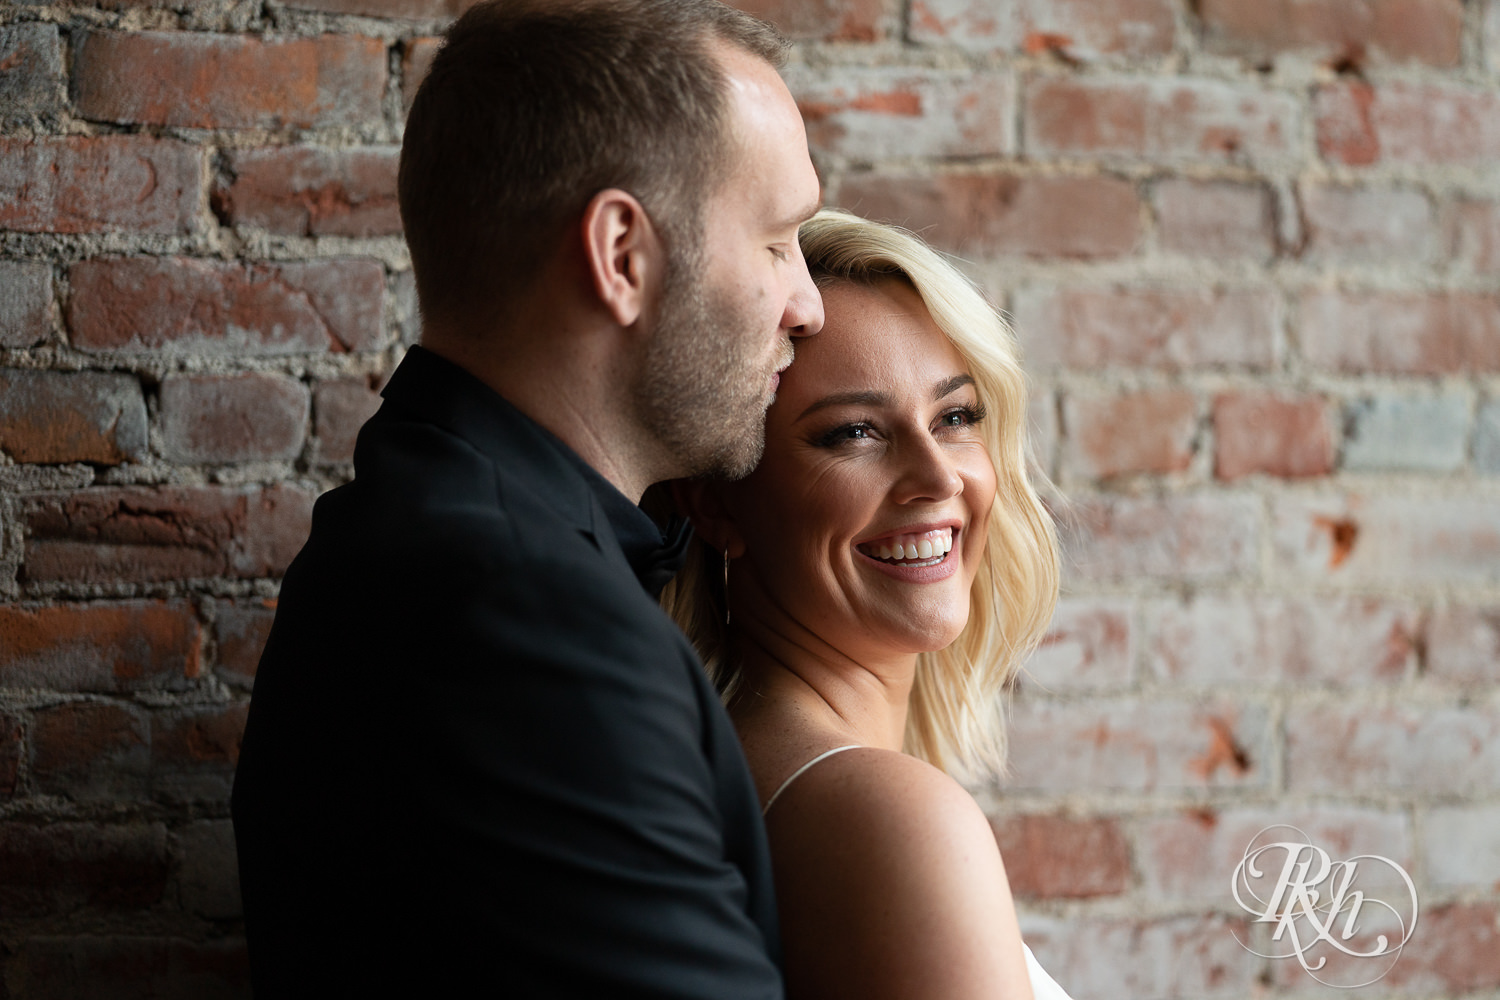 Bride and groom kissing next to brick wall at 3 Ten Event Venue in Faribault, Minnesota.